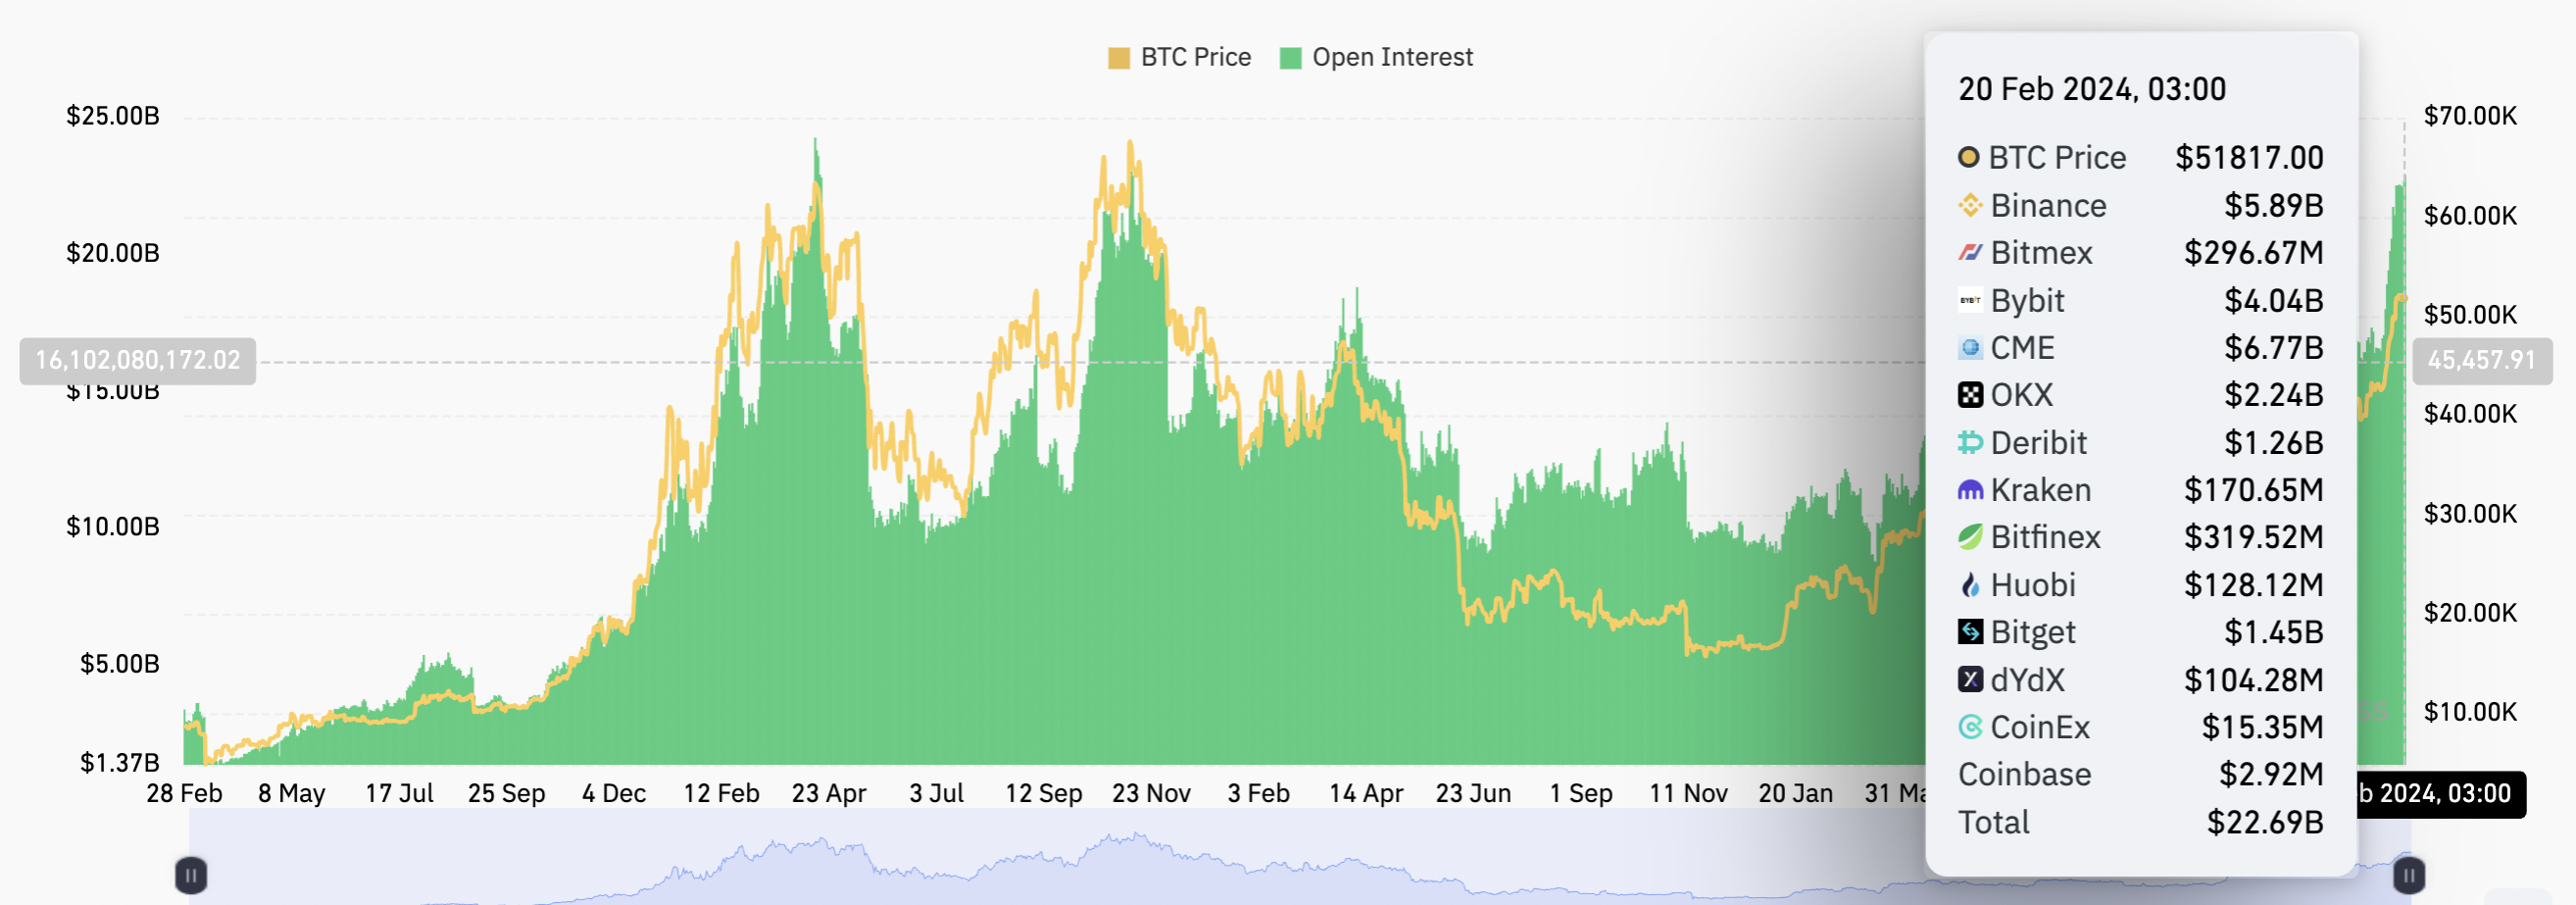 BTC futures open interest on all exchanges